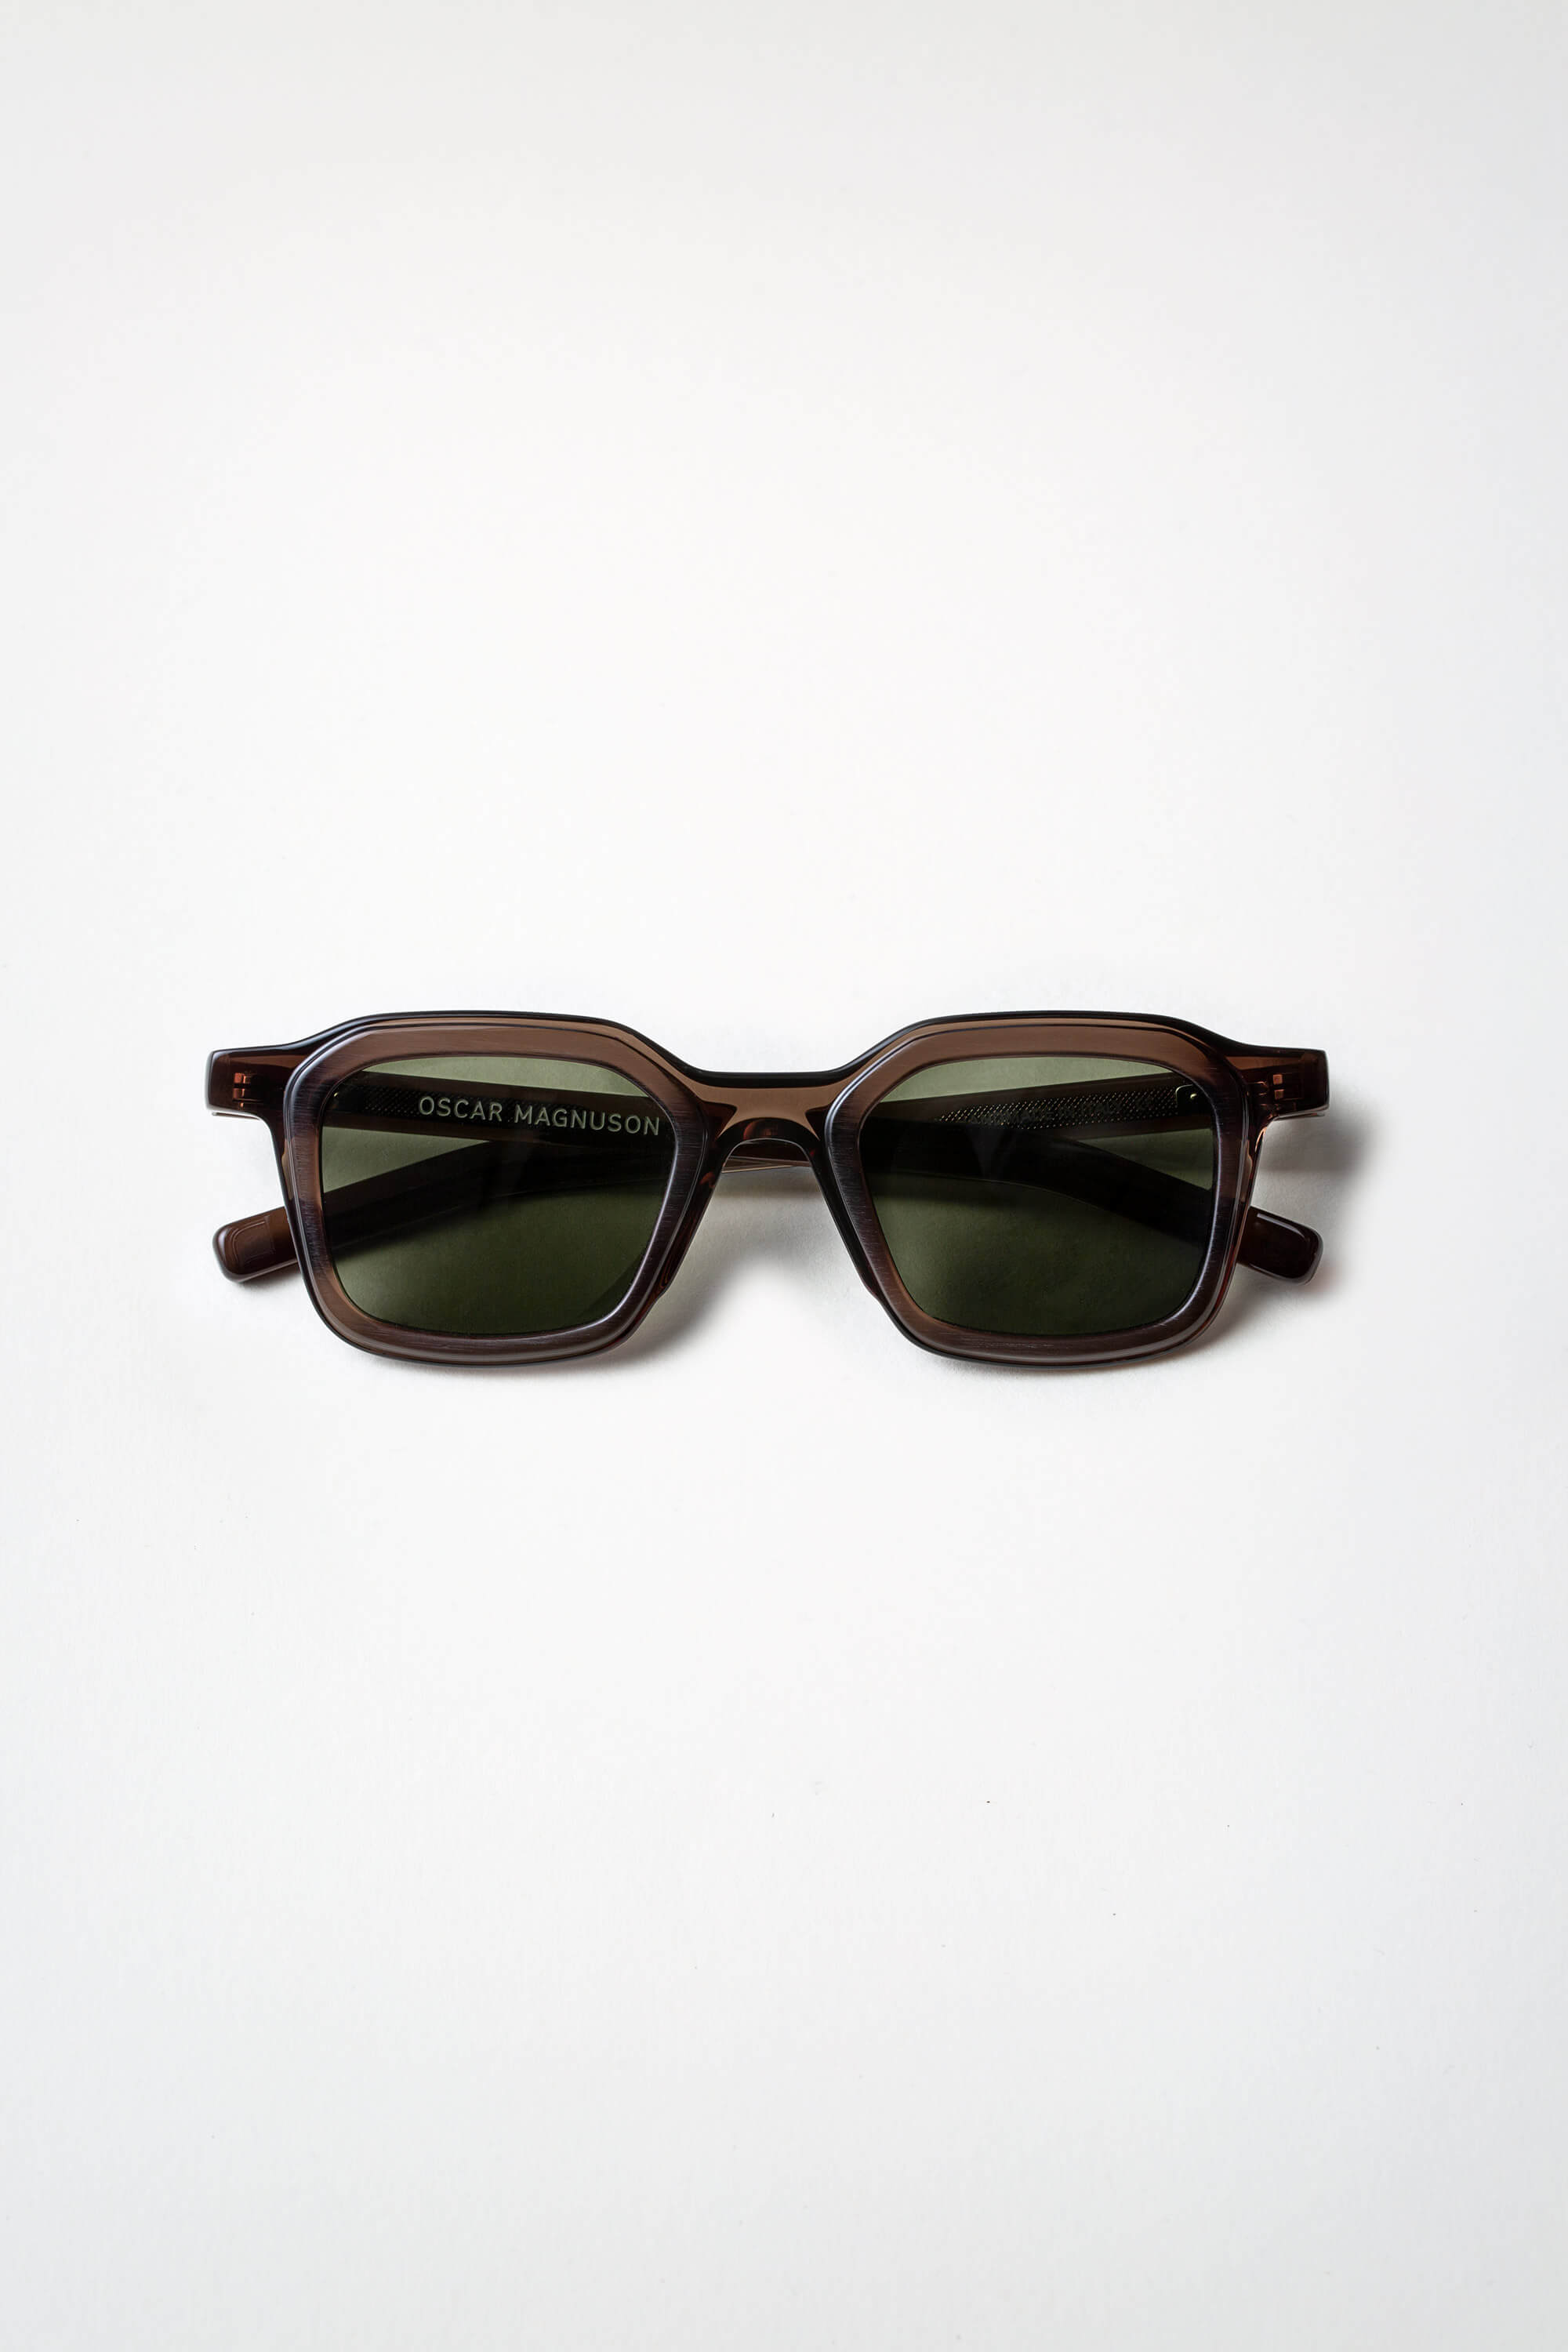 Oscar Magnuson River OM.5 sunglasses from the OM.5 collection